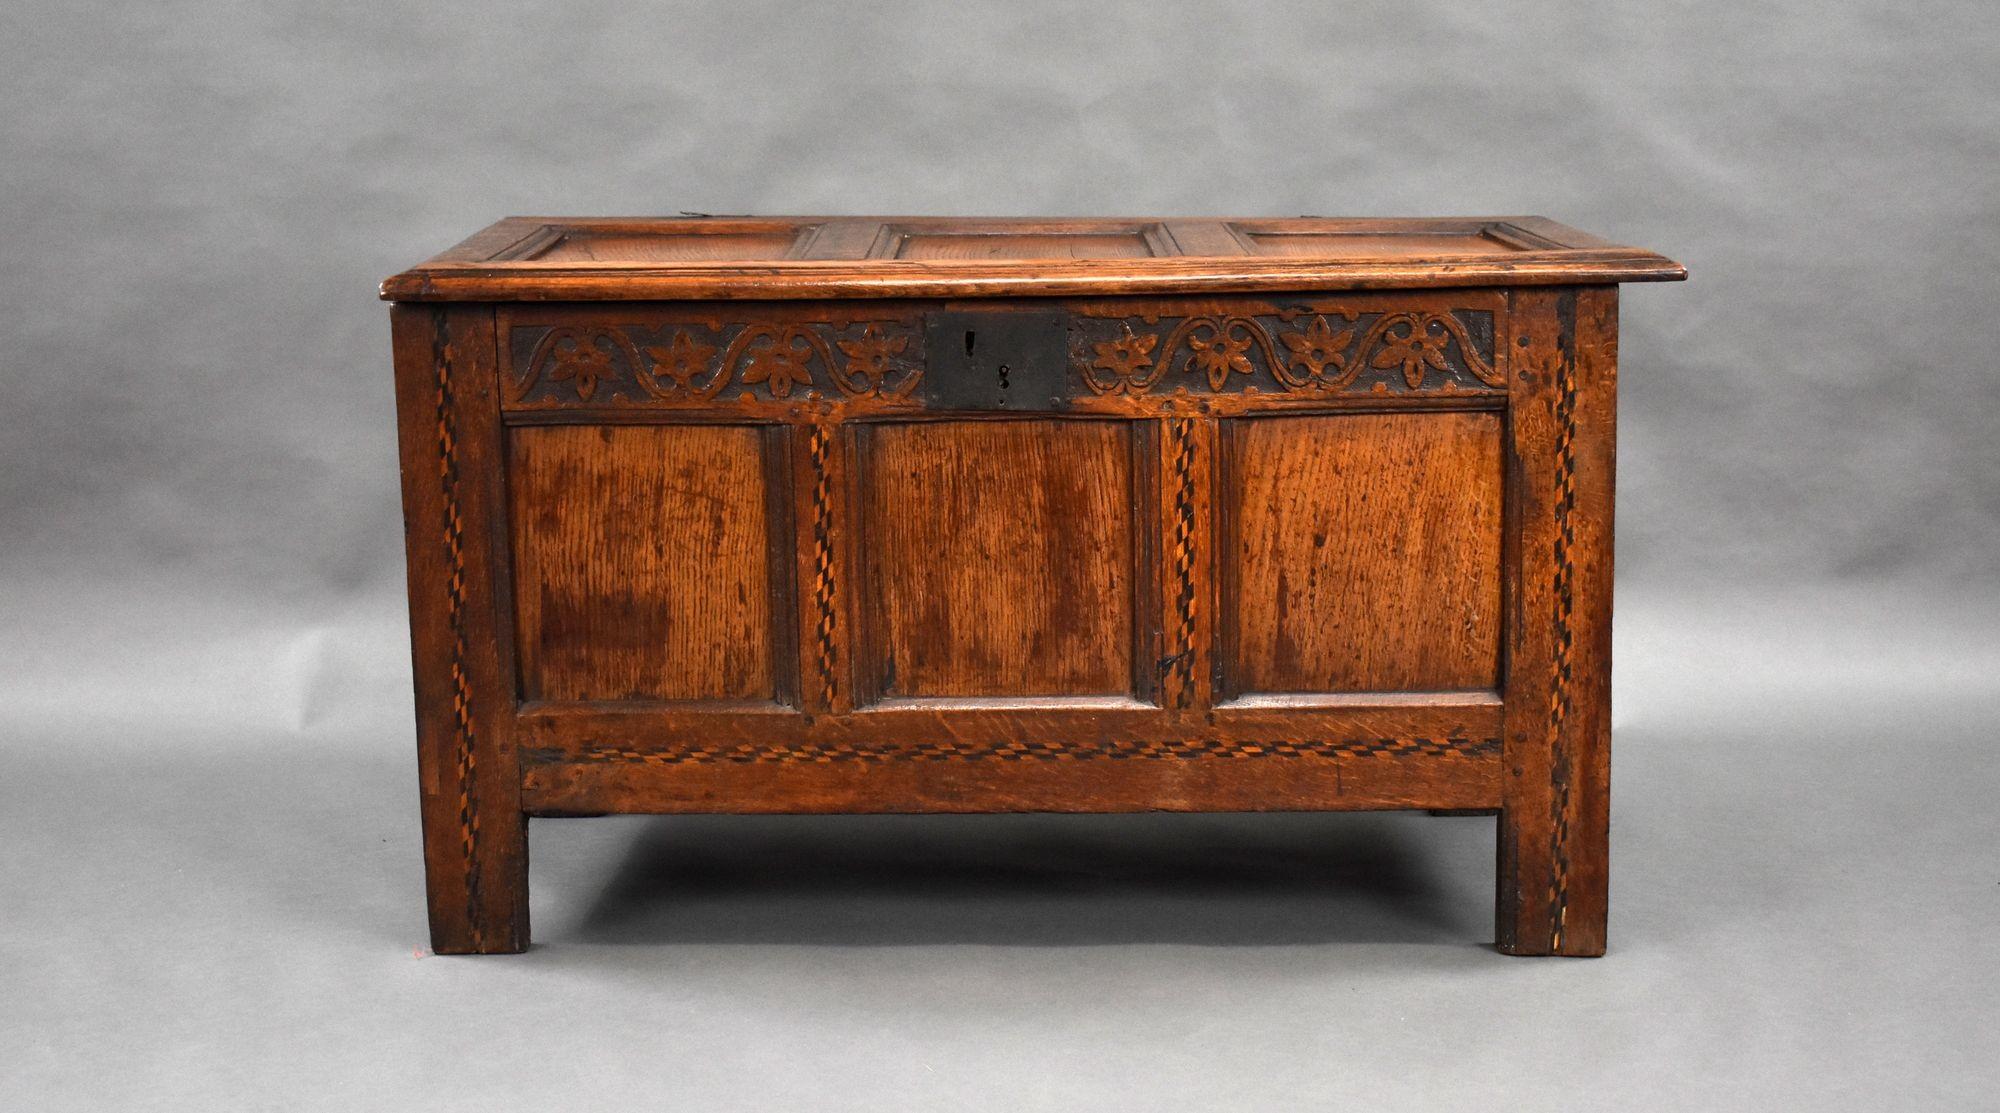 For sale is a good quality 18th century oak coffer, having a hinged and paneled lid, above a paneled front, standing on square feet, this piece remains in very good condition for its age.

Width: 107cm Depth: 52cm Height: 60cm